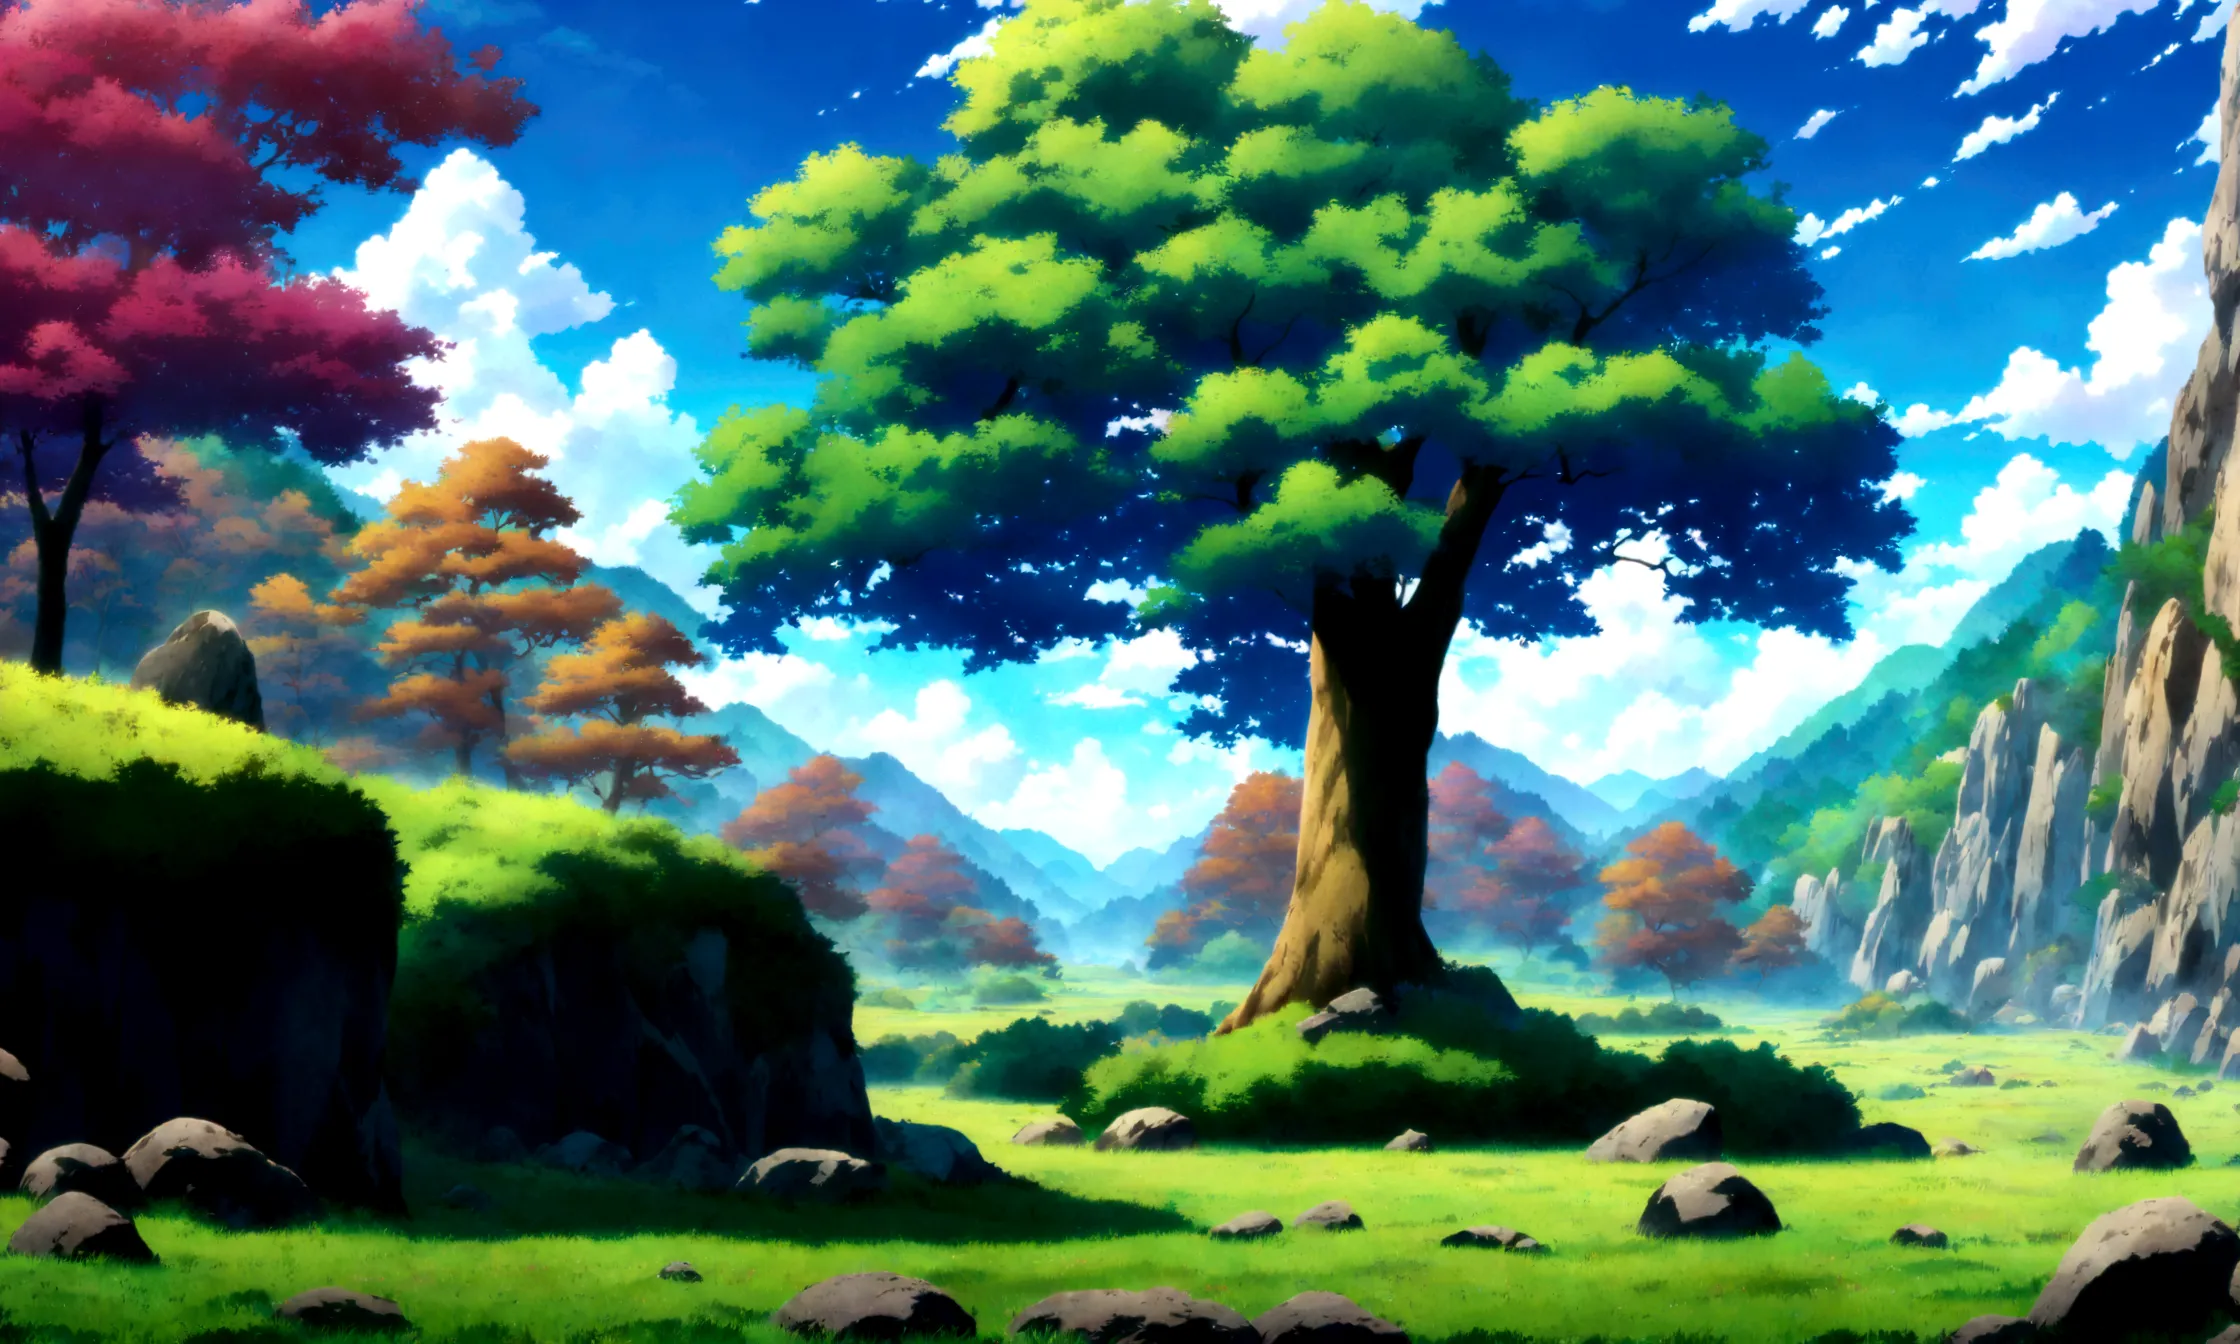 
anime - style painting of a tree in a grassy field with rocks, anime countryside landscape, anime landscape, anime landscape wa...